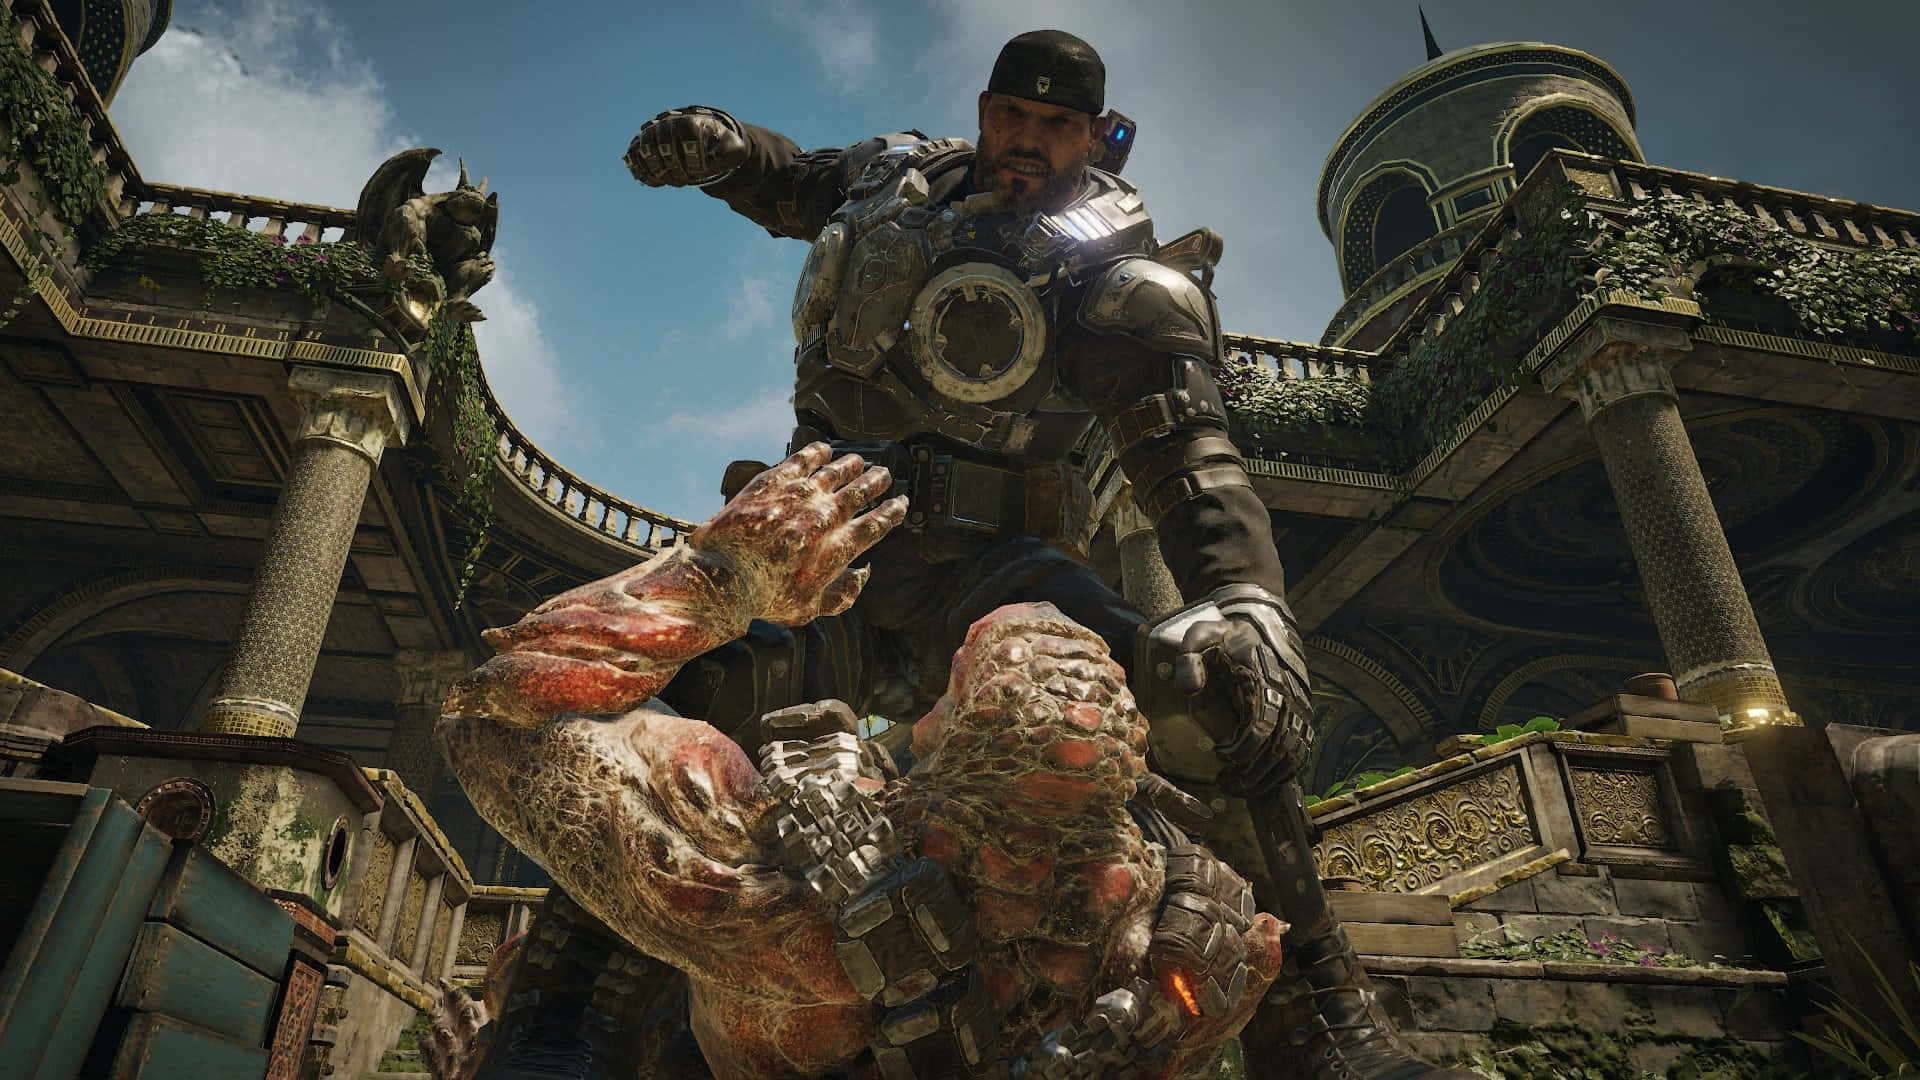 Image  Marcus Fenix unearths a COG emblem amidst destroyed surroundings in Best Gears of War 5